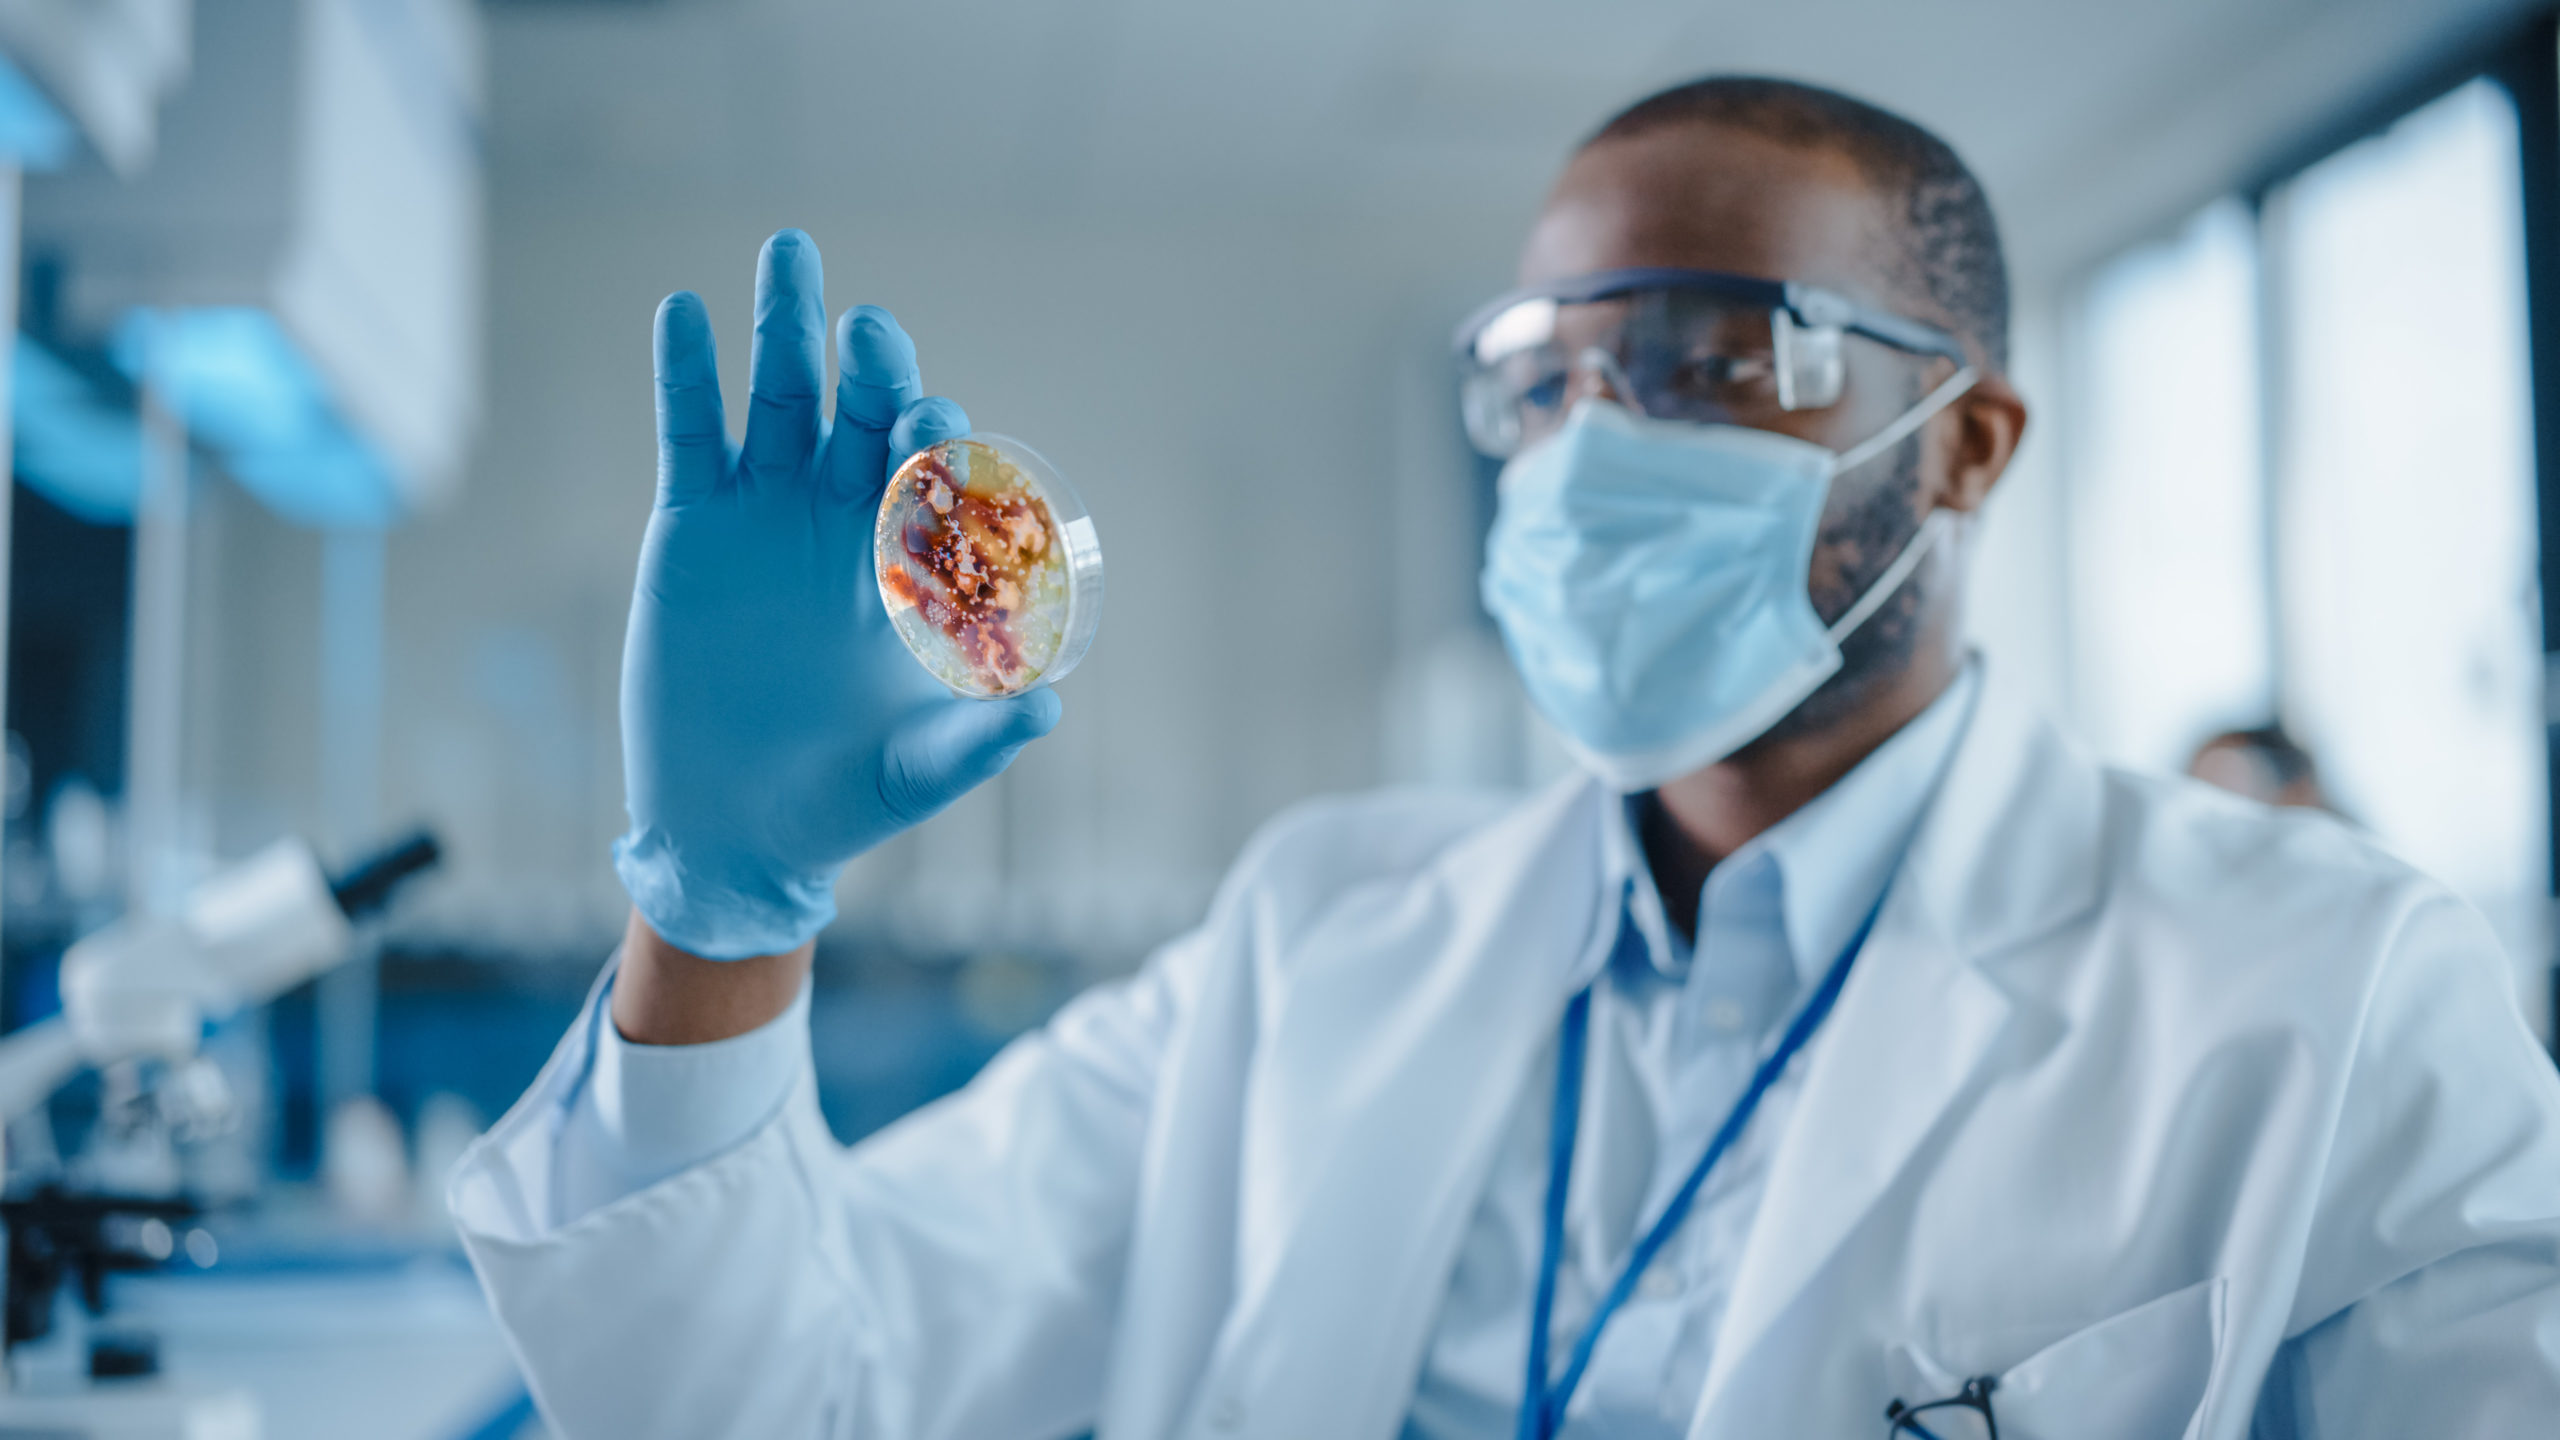 African American Male Scientist Wearing Face Mask and Glasses Looking at Petri Dish with Genetically Modified Sample Chemicals. Microbiologist Working in Modern Laboratory with Technological Equipment